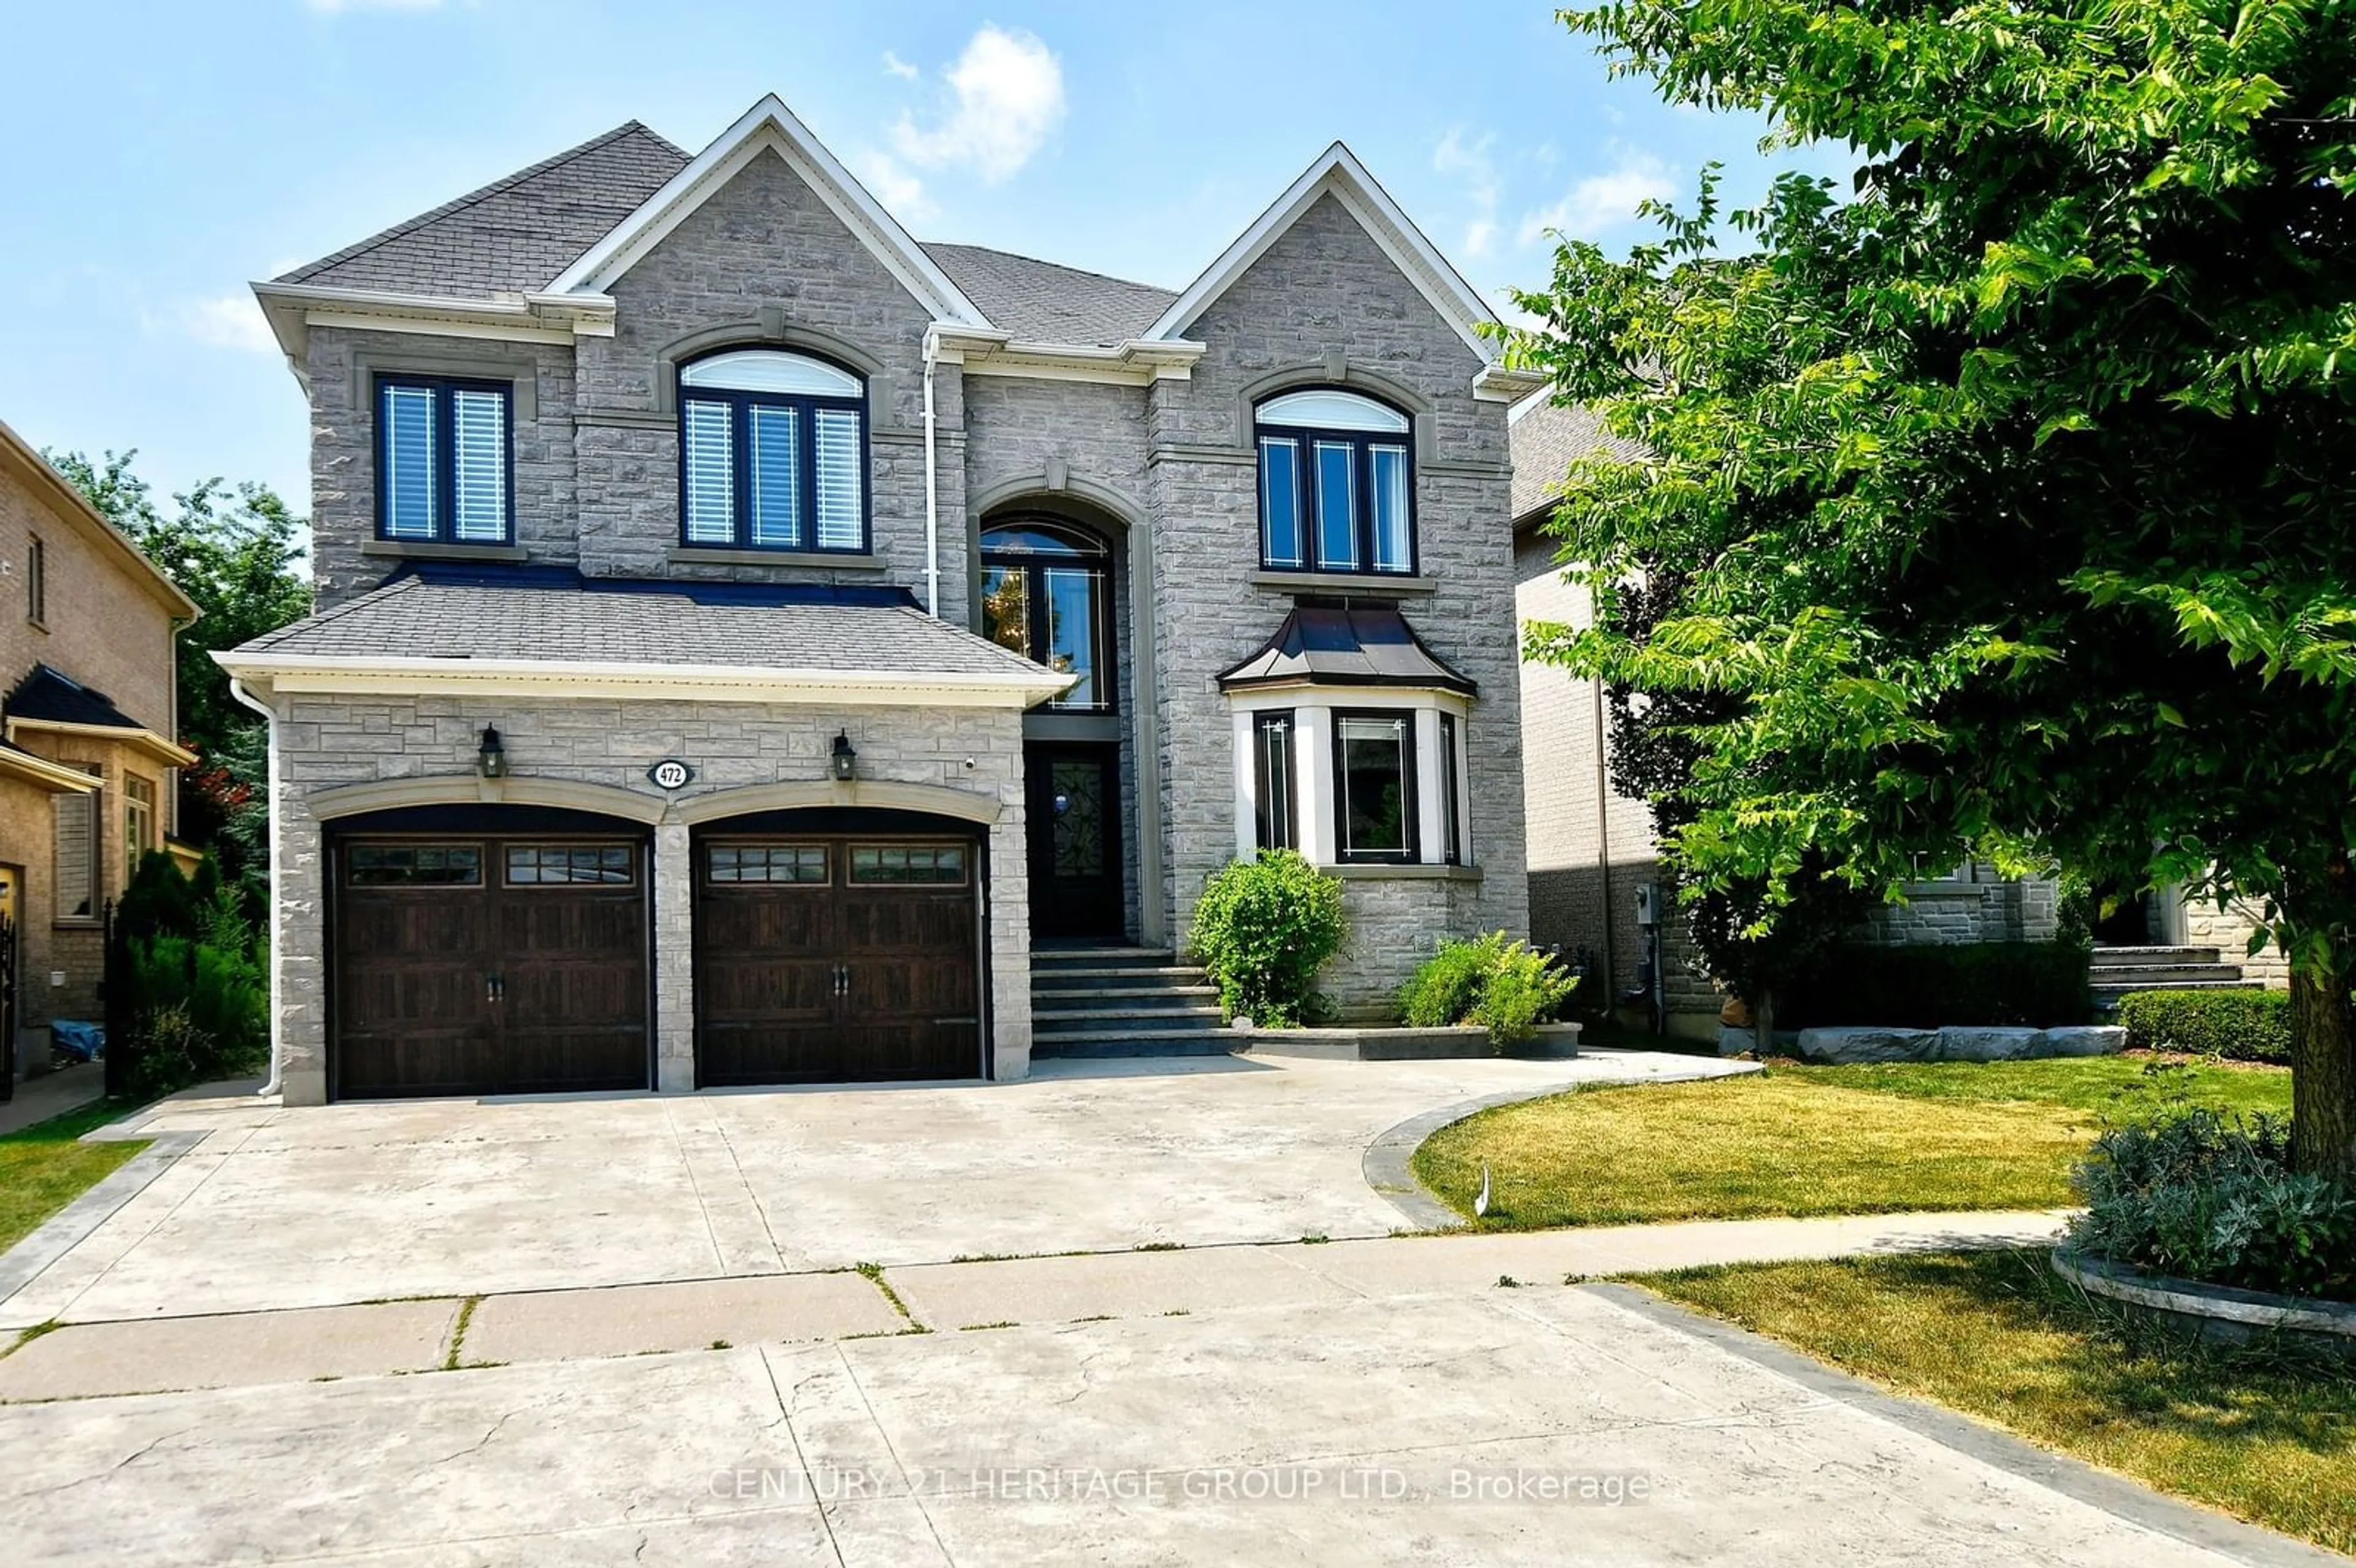 Home with brick exterior material for 472 Worthington Ave, Richmond Hill Ontario L4W 4R6